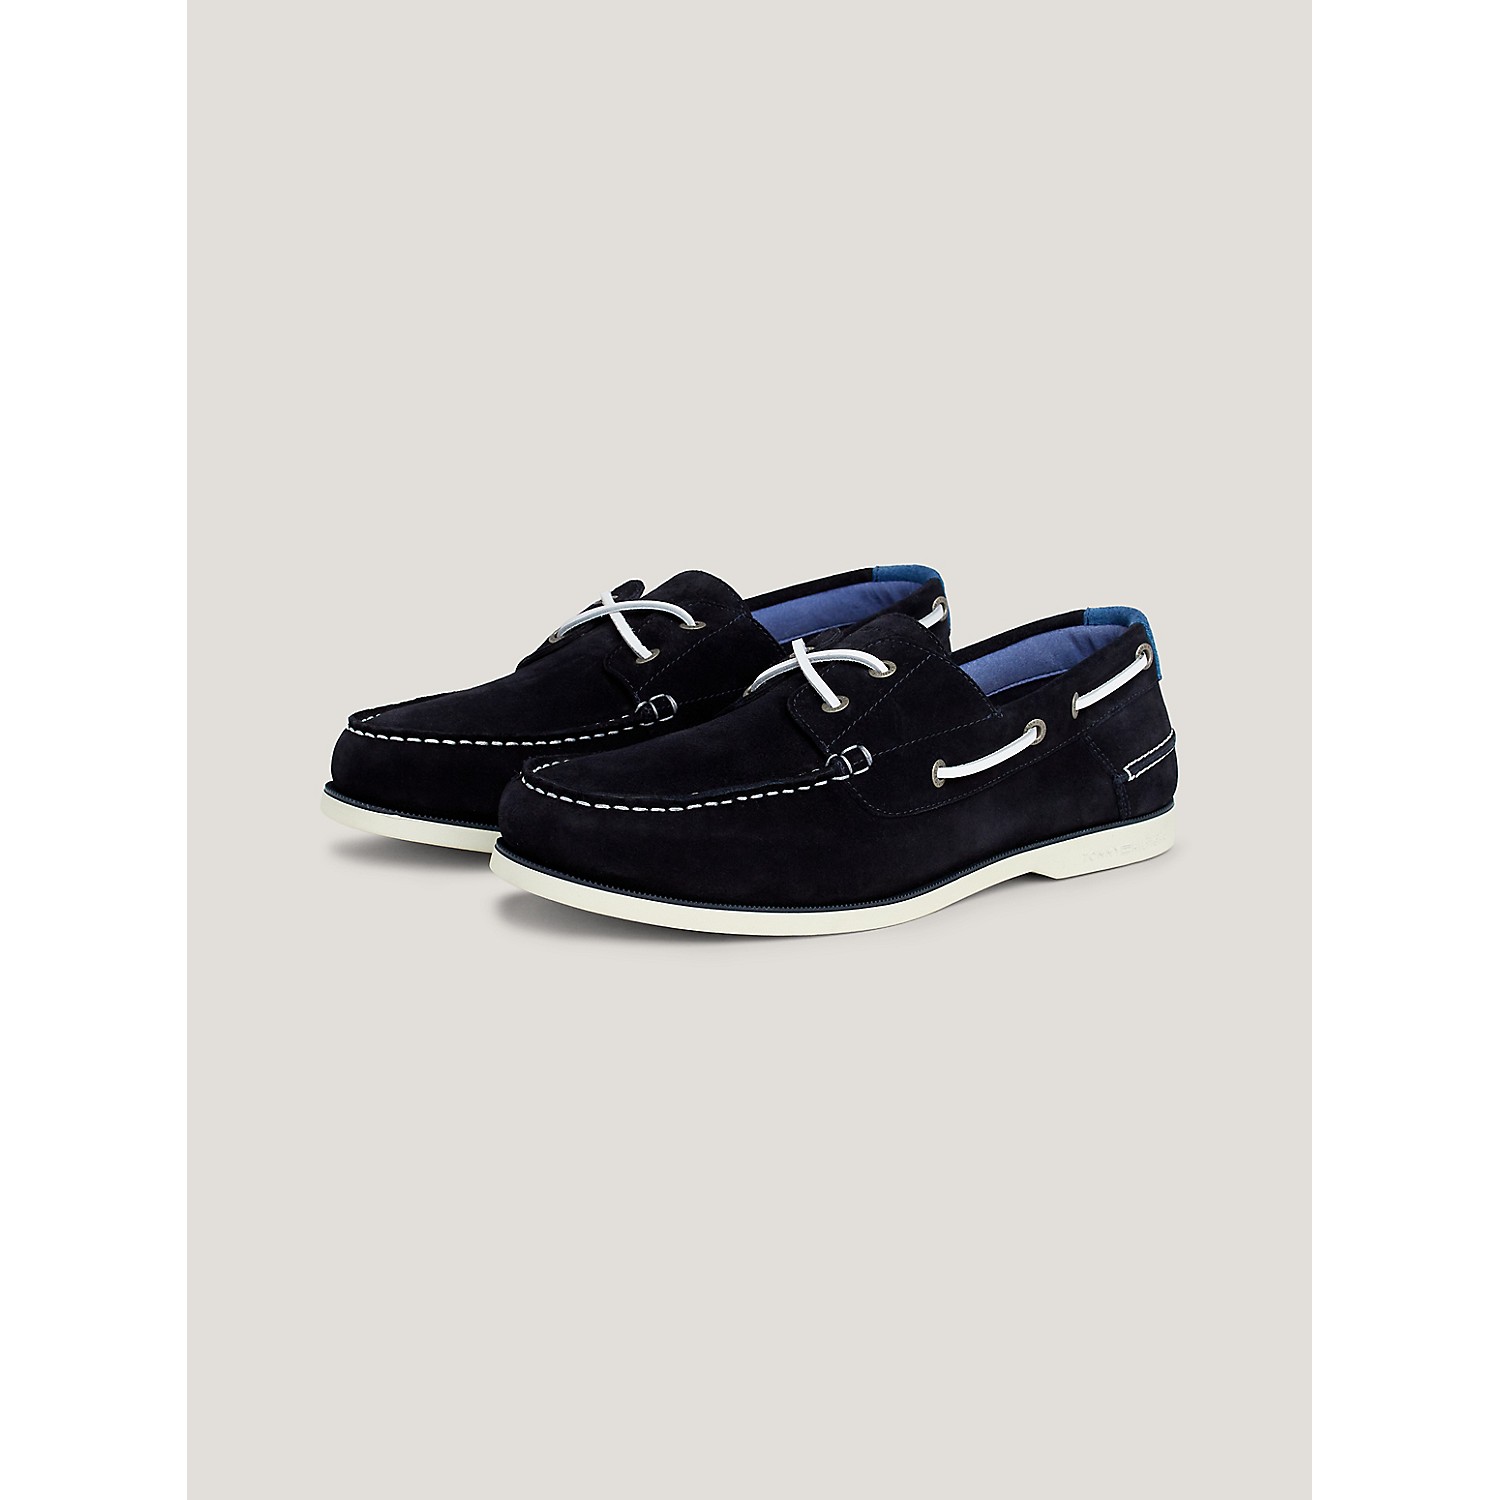 TOMMY HILFIGER TH Suede Boat Shoe